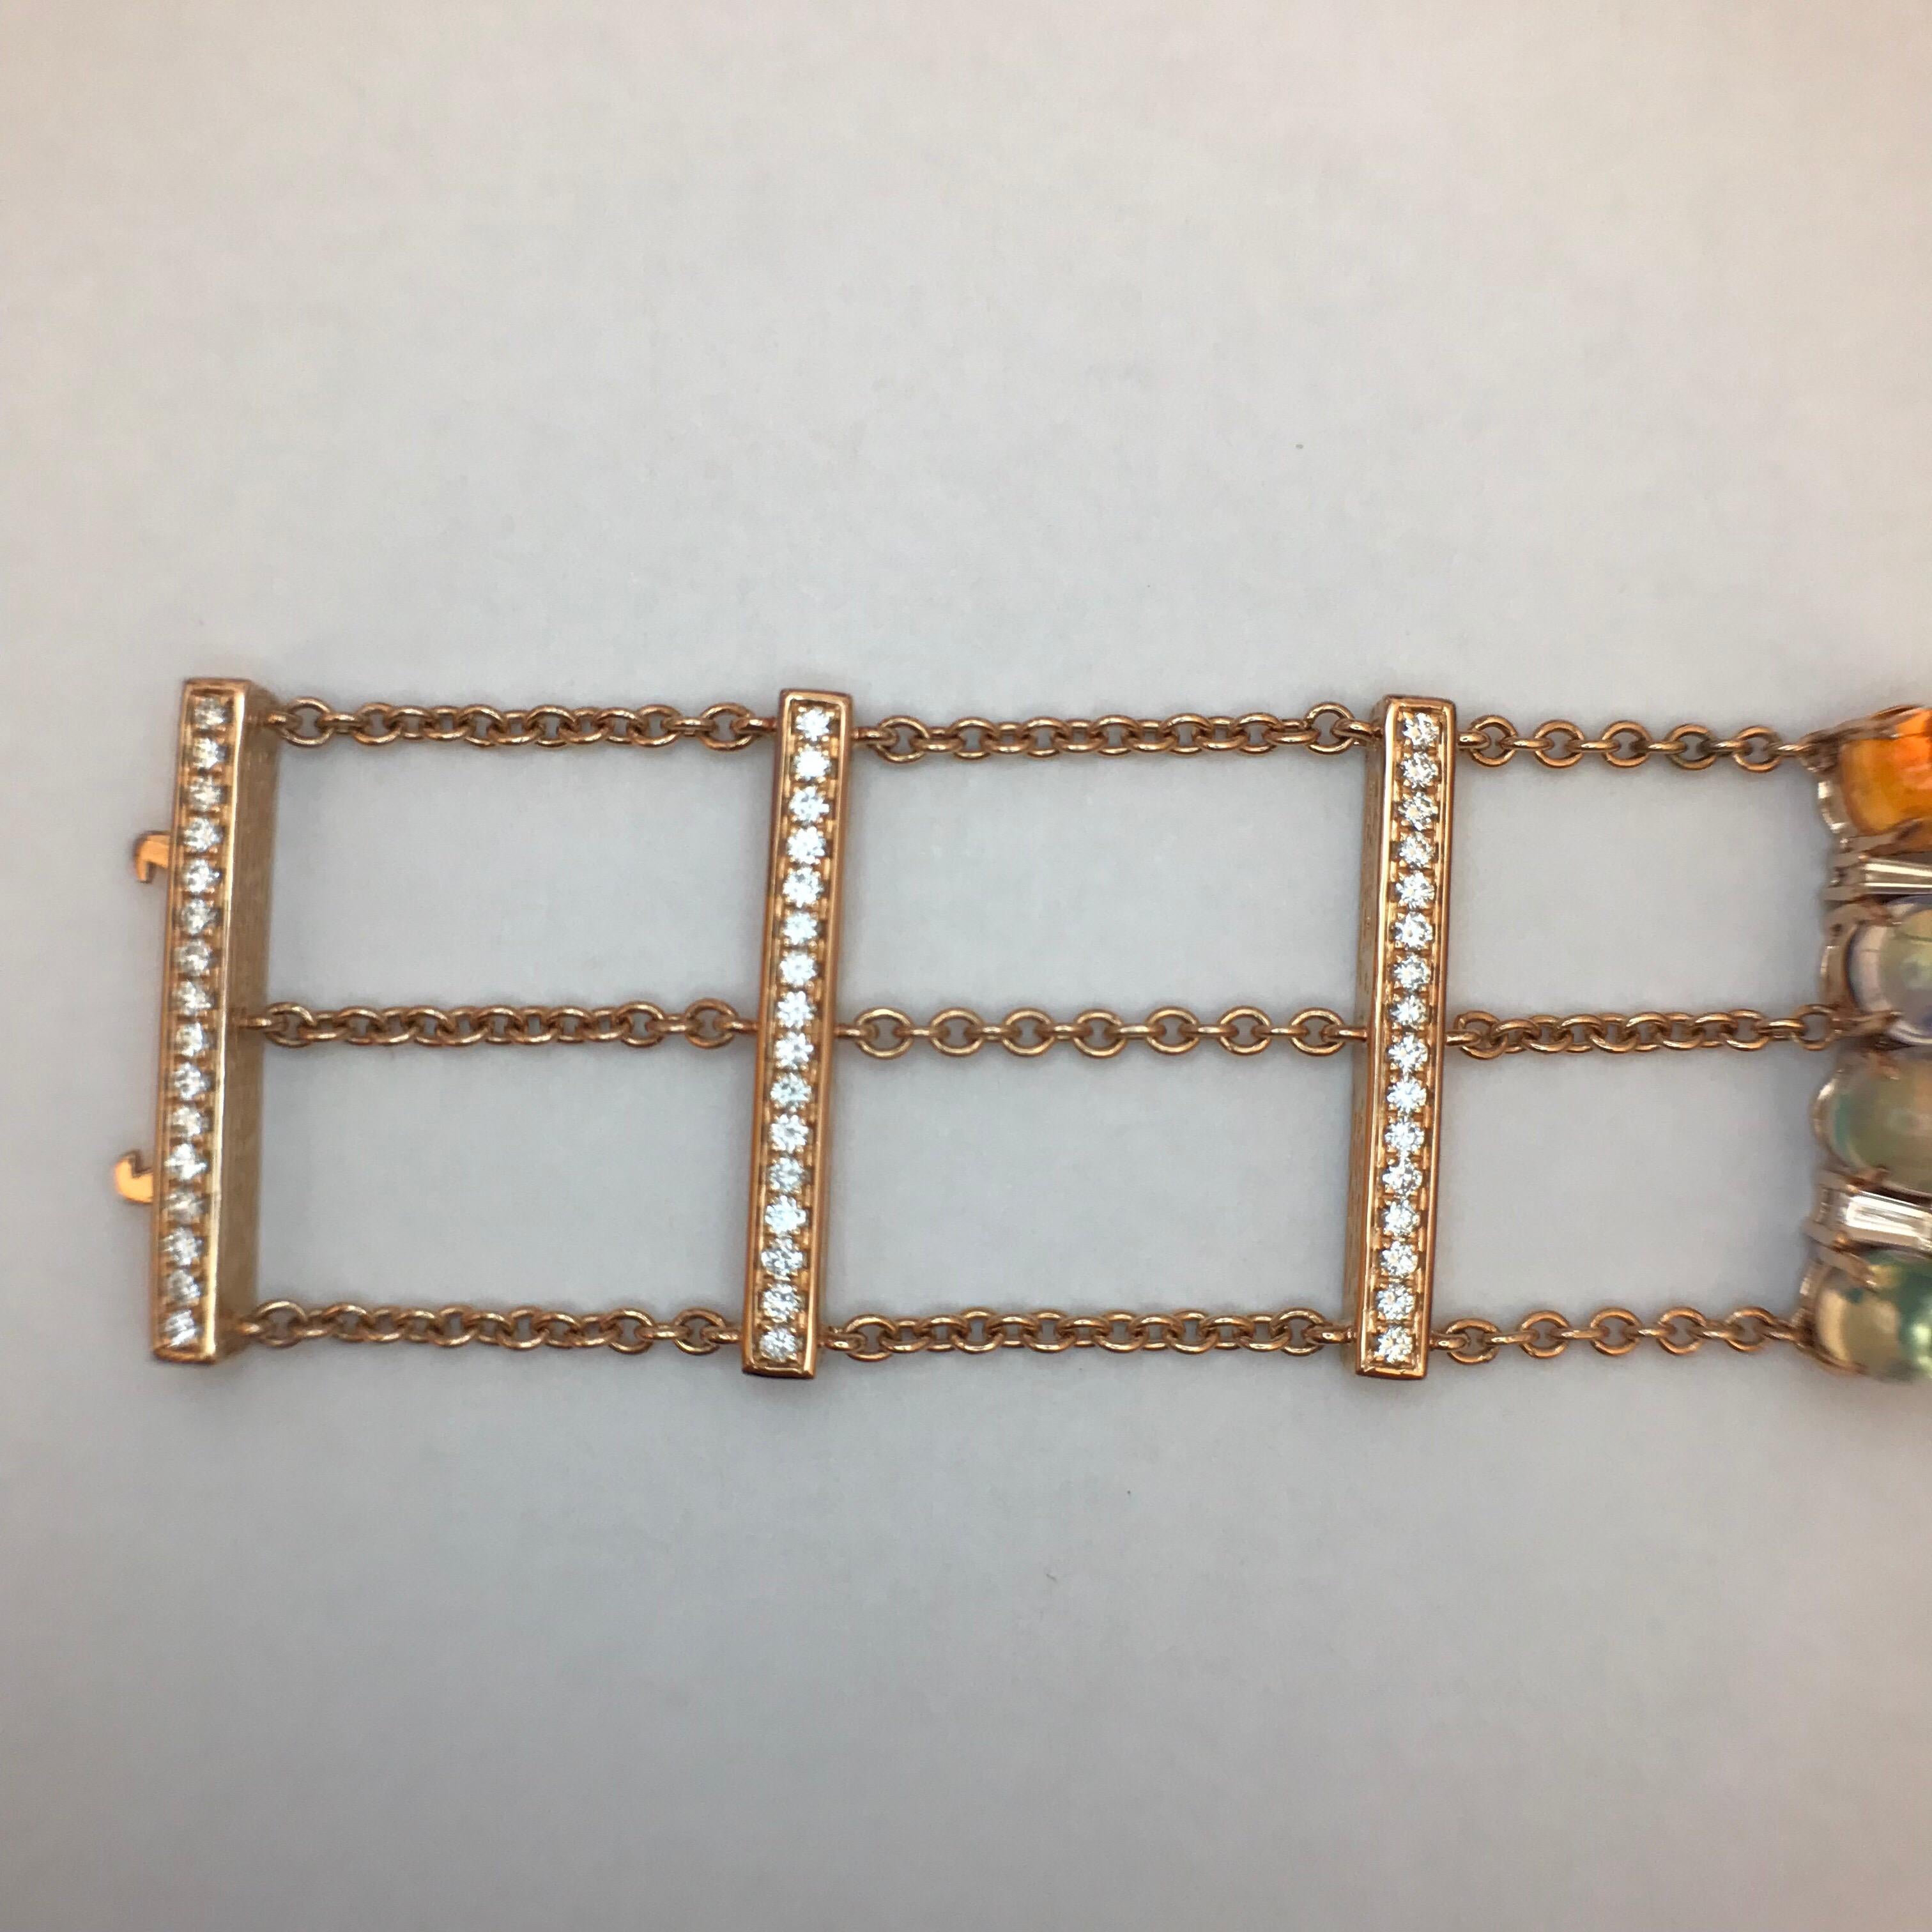 They say that “good things come in threes”, and this bracelet is no exception. Two sections composed of three chains and three bars accents a third section composed of crystalline opals, fire opals and diamonds. This quartet of trios come together